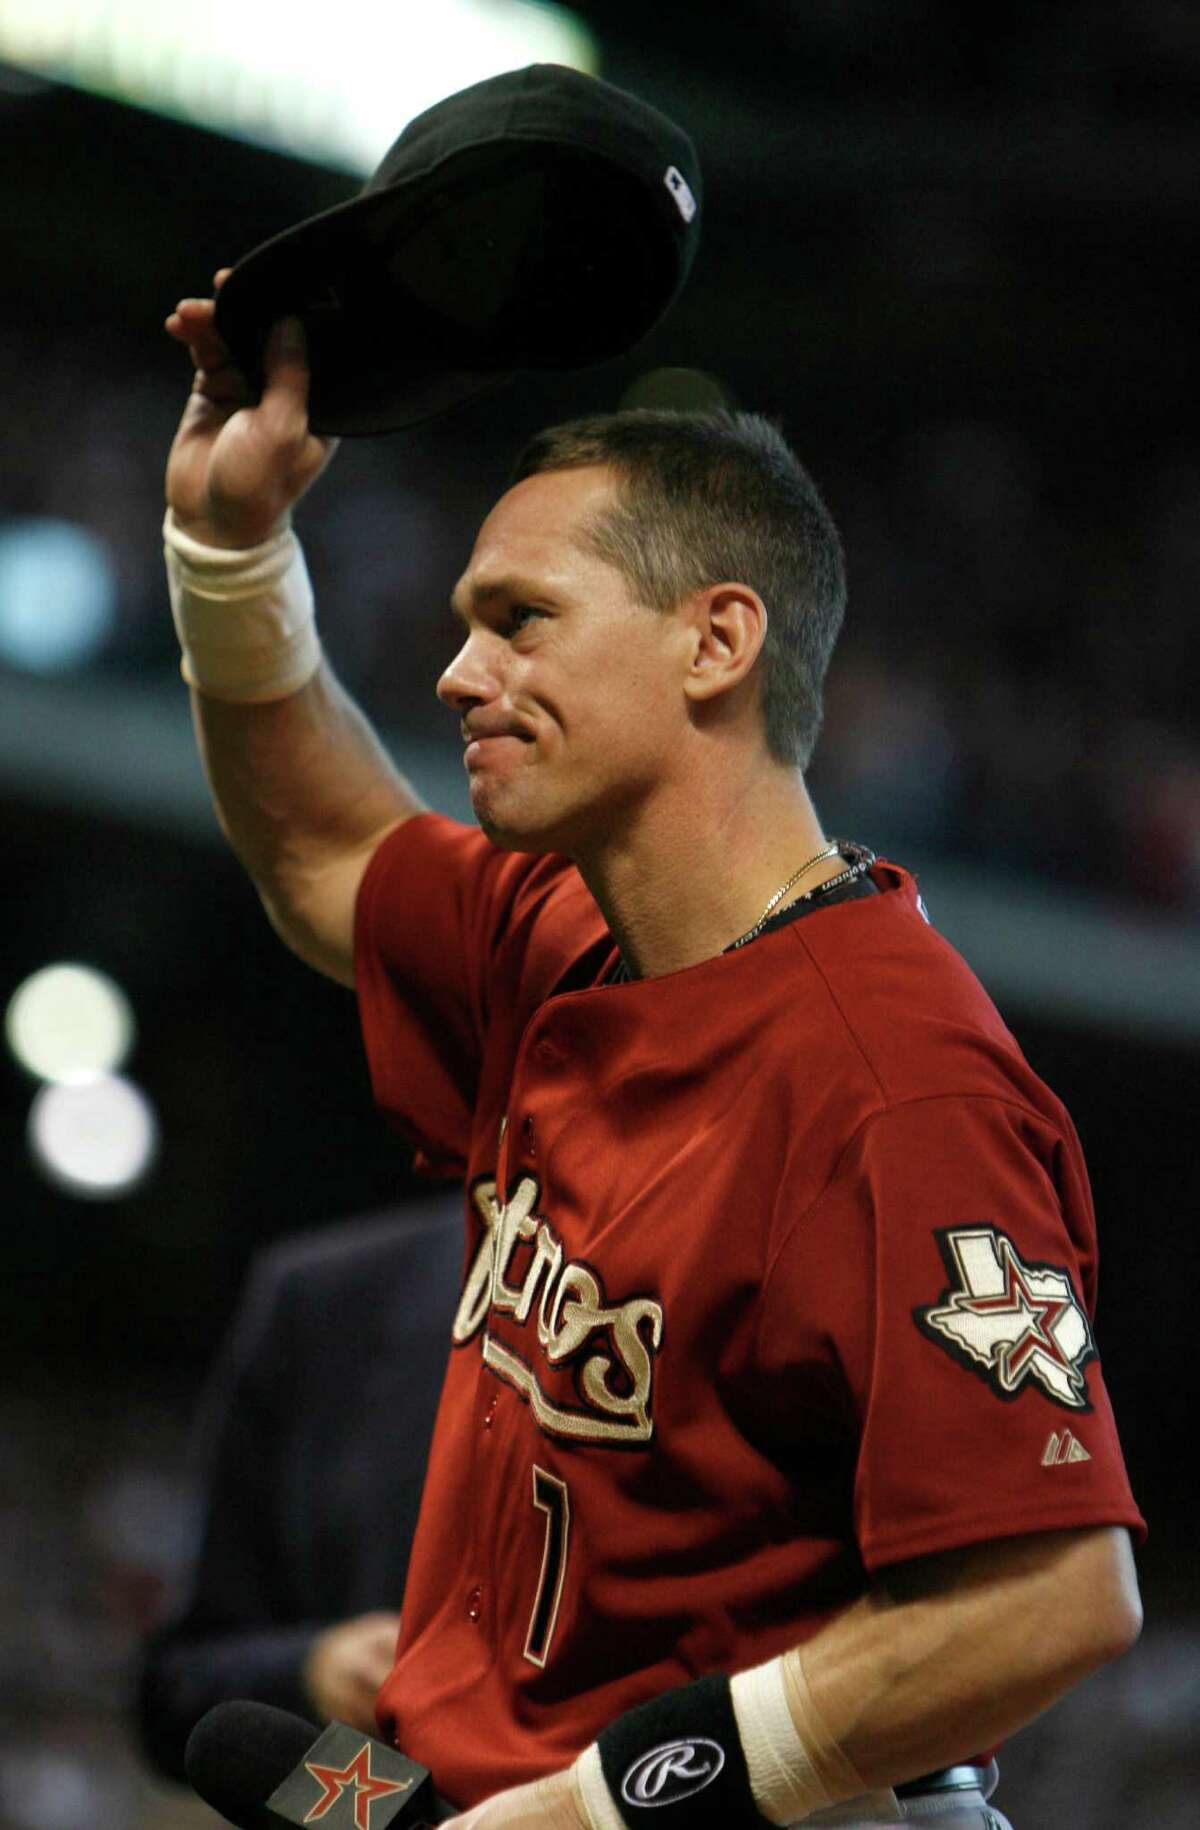 Craig Biggio played in Houston for all 20 of his major league seasons, and his Cooperstown plaque will be the first to feature an Astros cap.